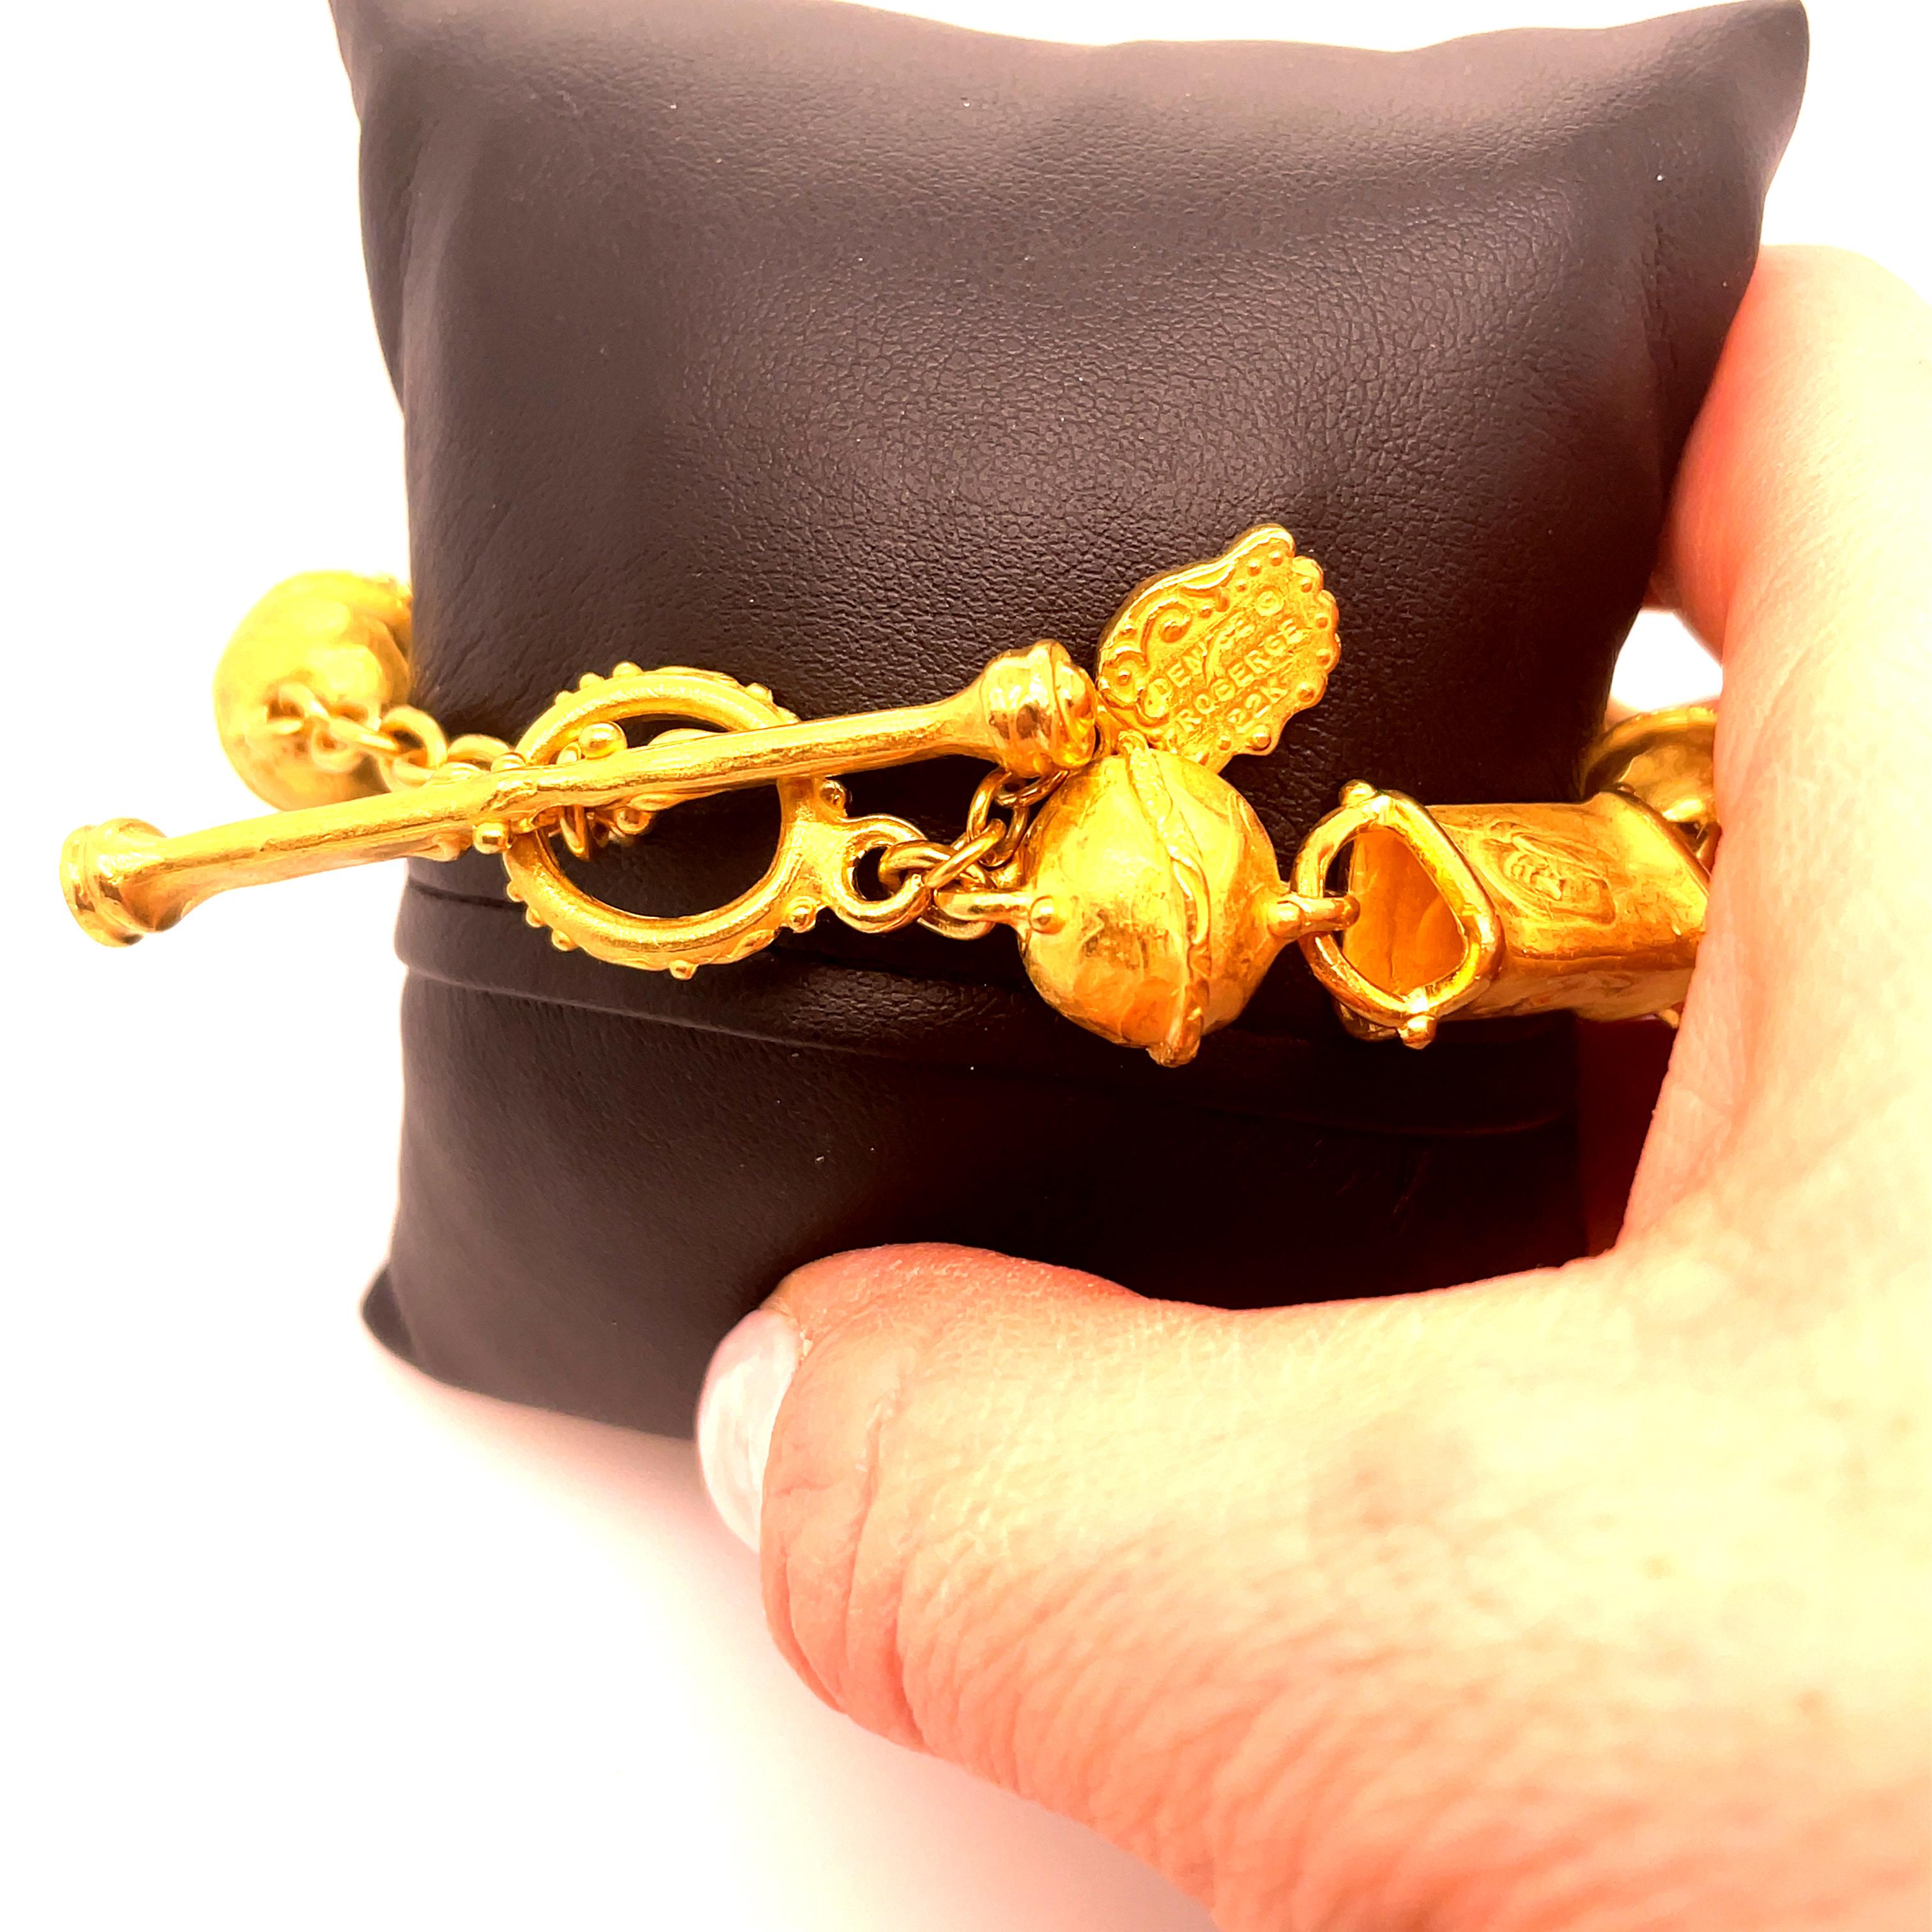 Perfect Denise Roberge bracelet made from 22kt yellow gold